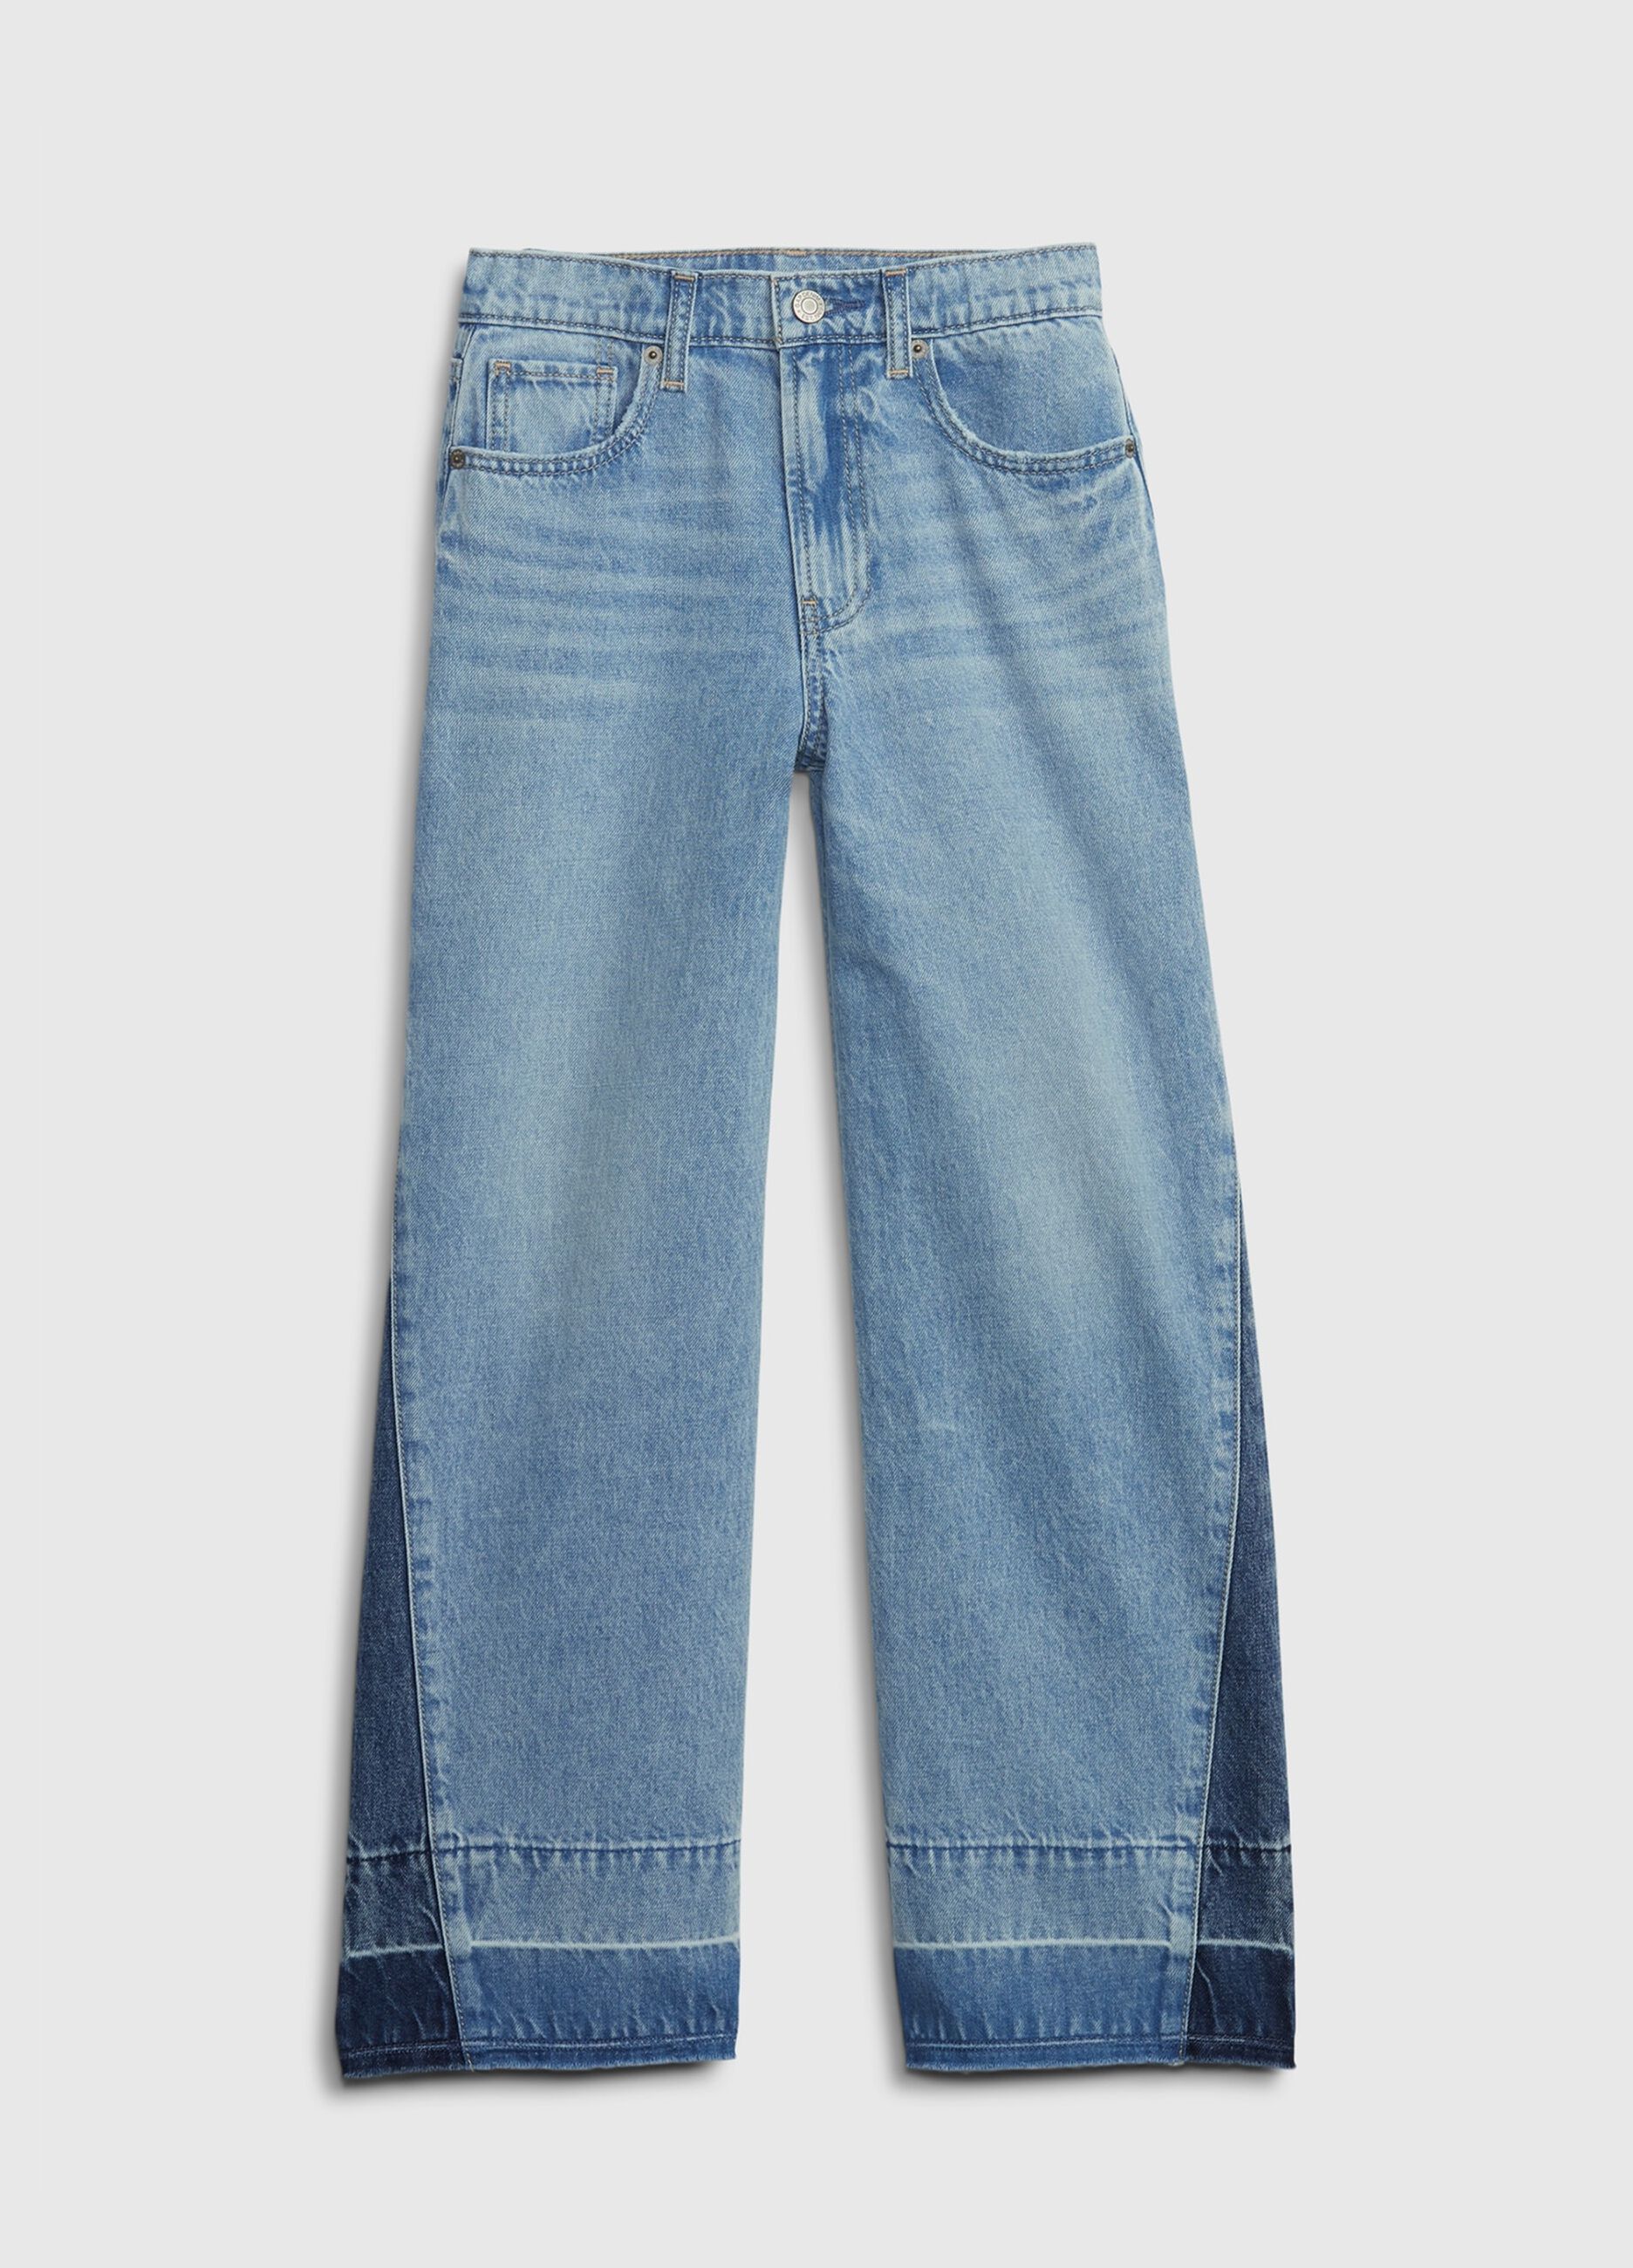 Low stride jeans with contrasting inserts